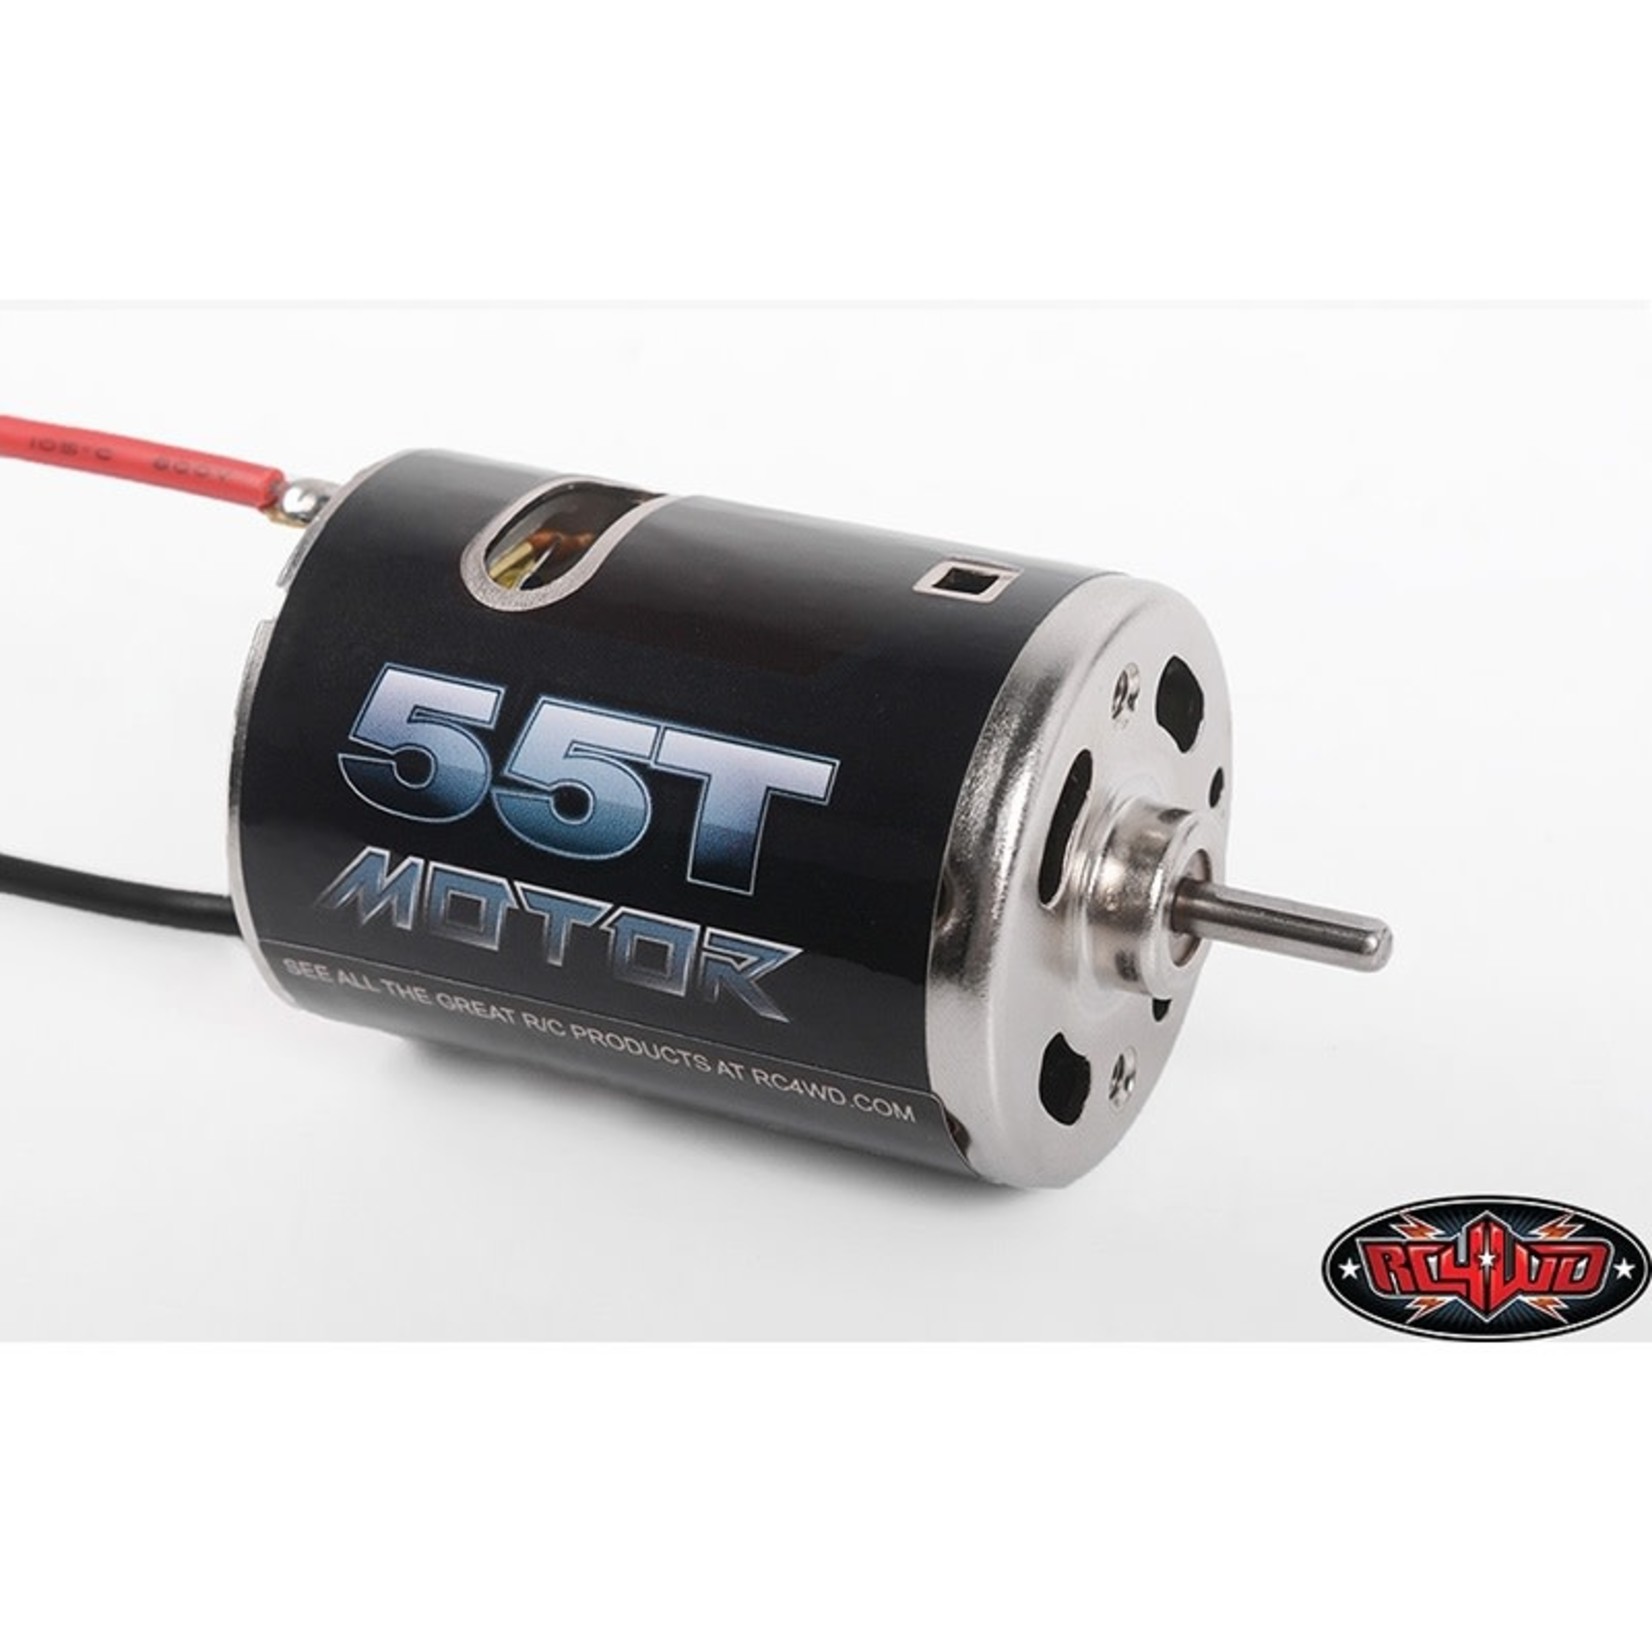 RC4WD RC4ZE0003 RC4WD 540 Crawler Brushed Motor 55T